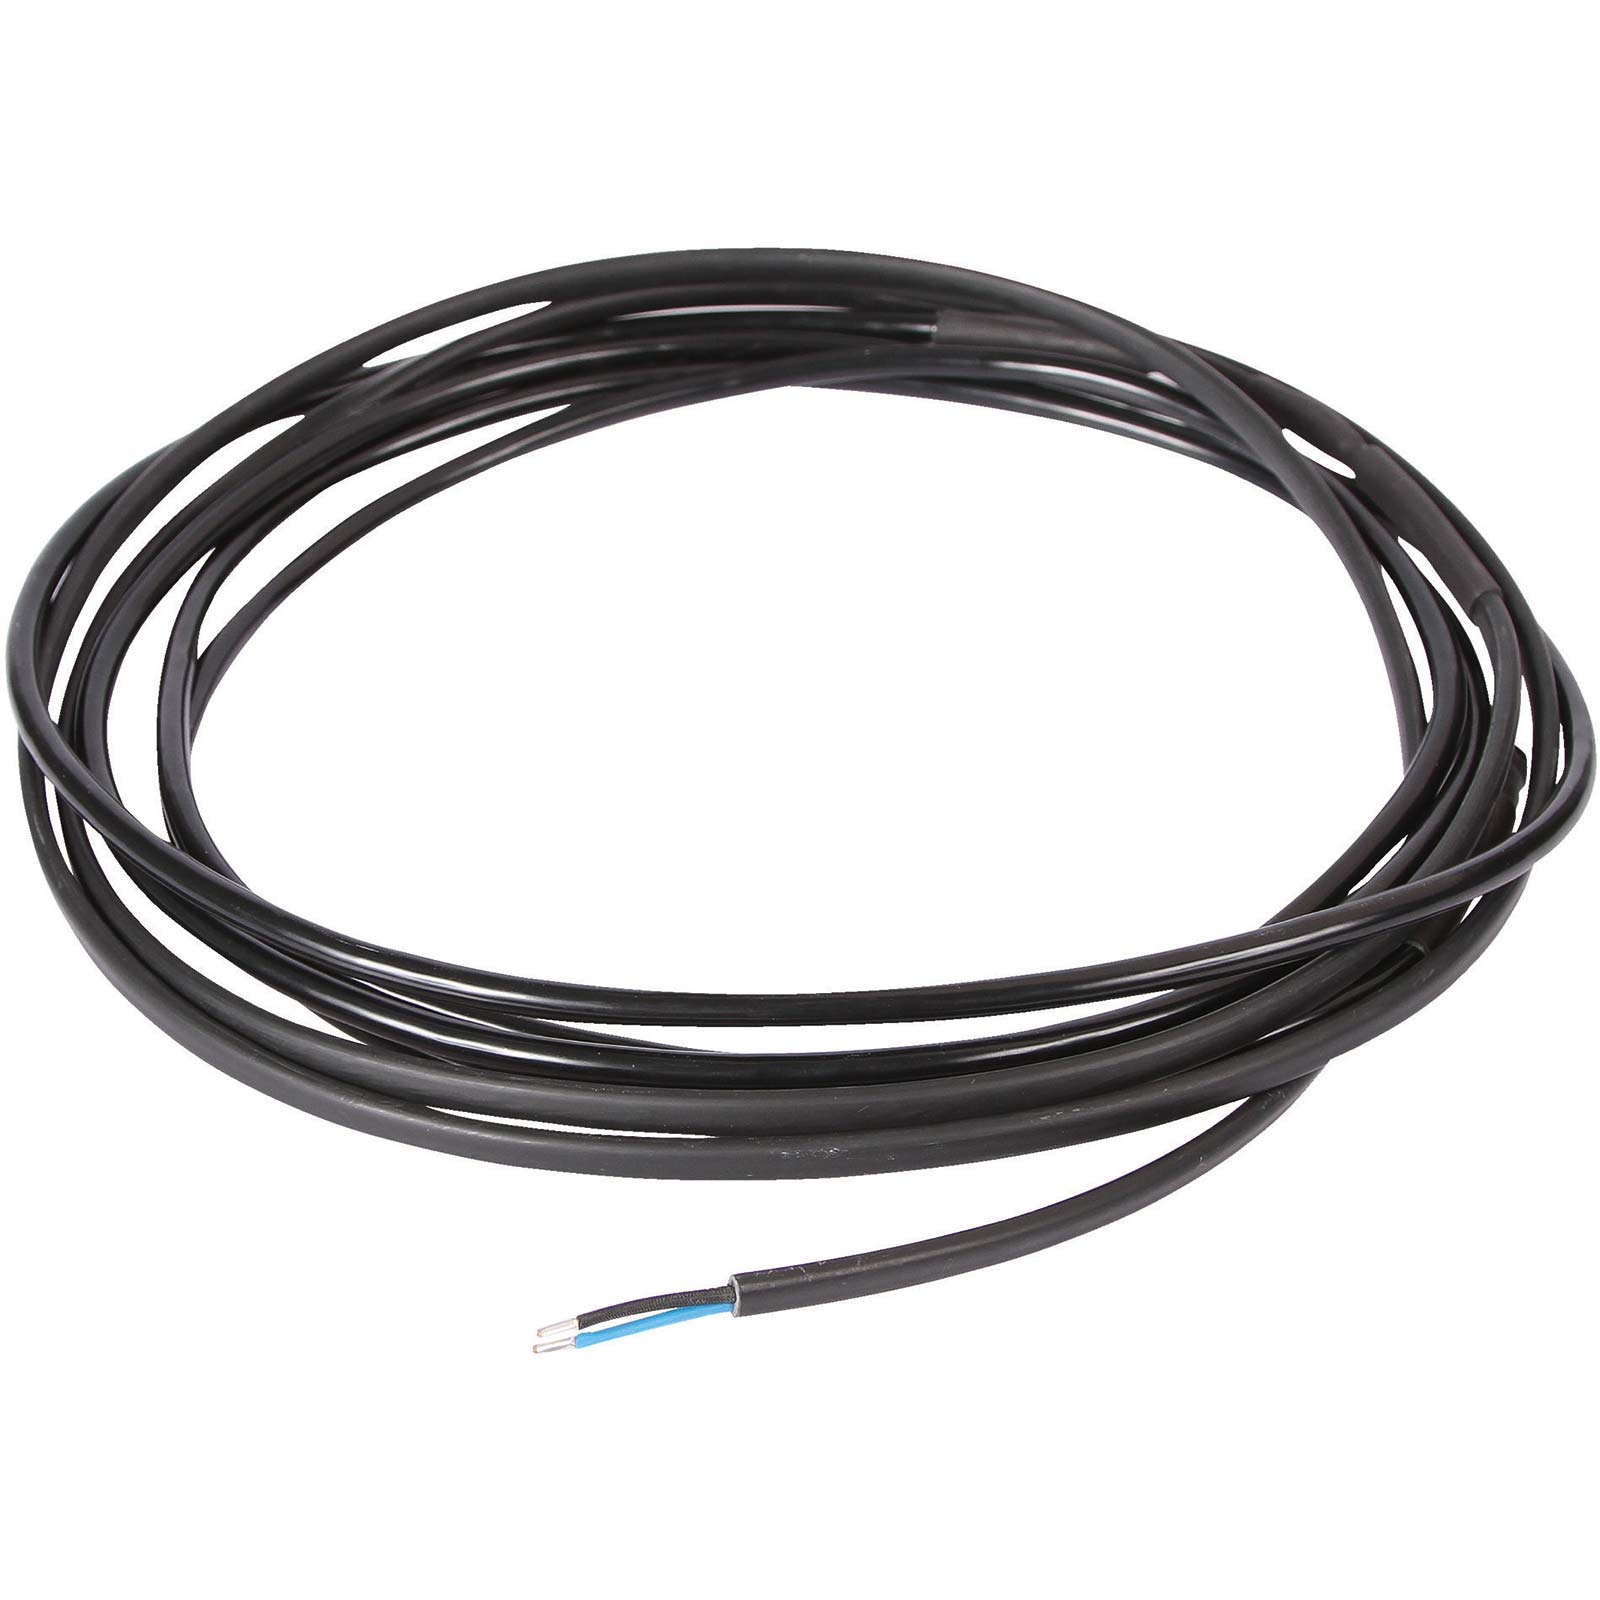 24 V Frost-Protection Heating Cable